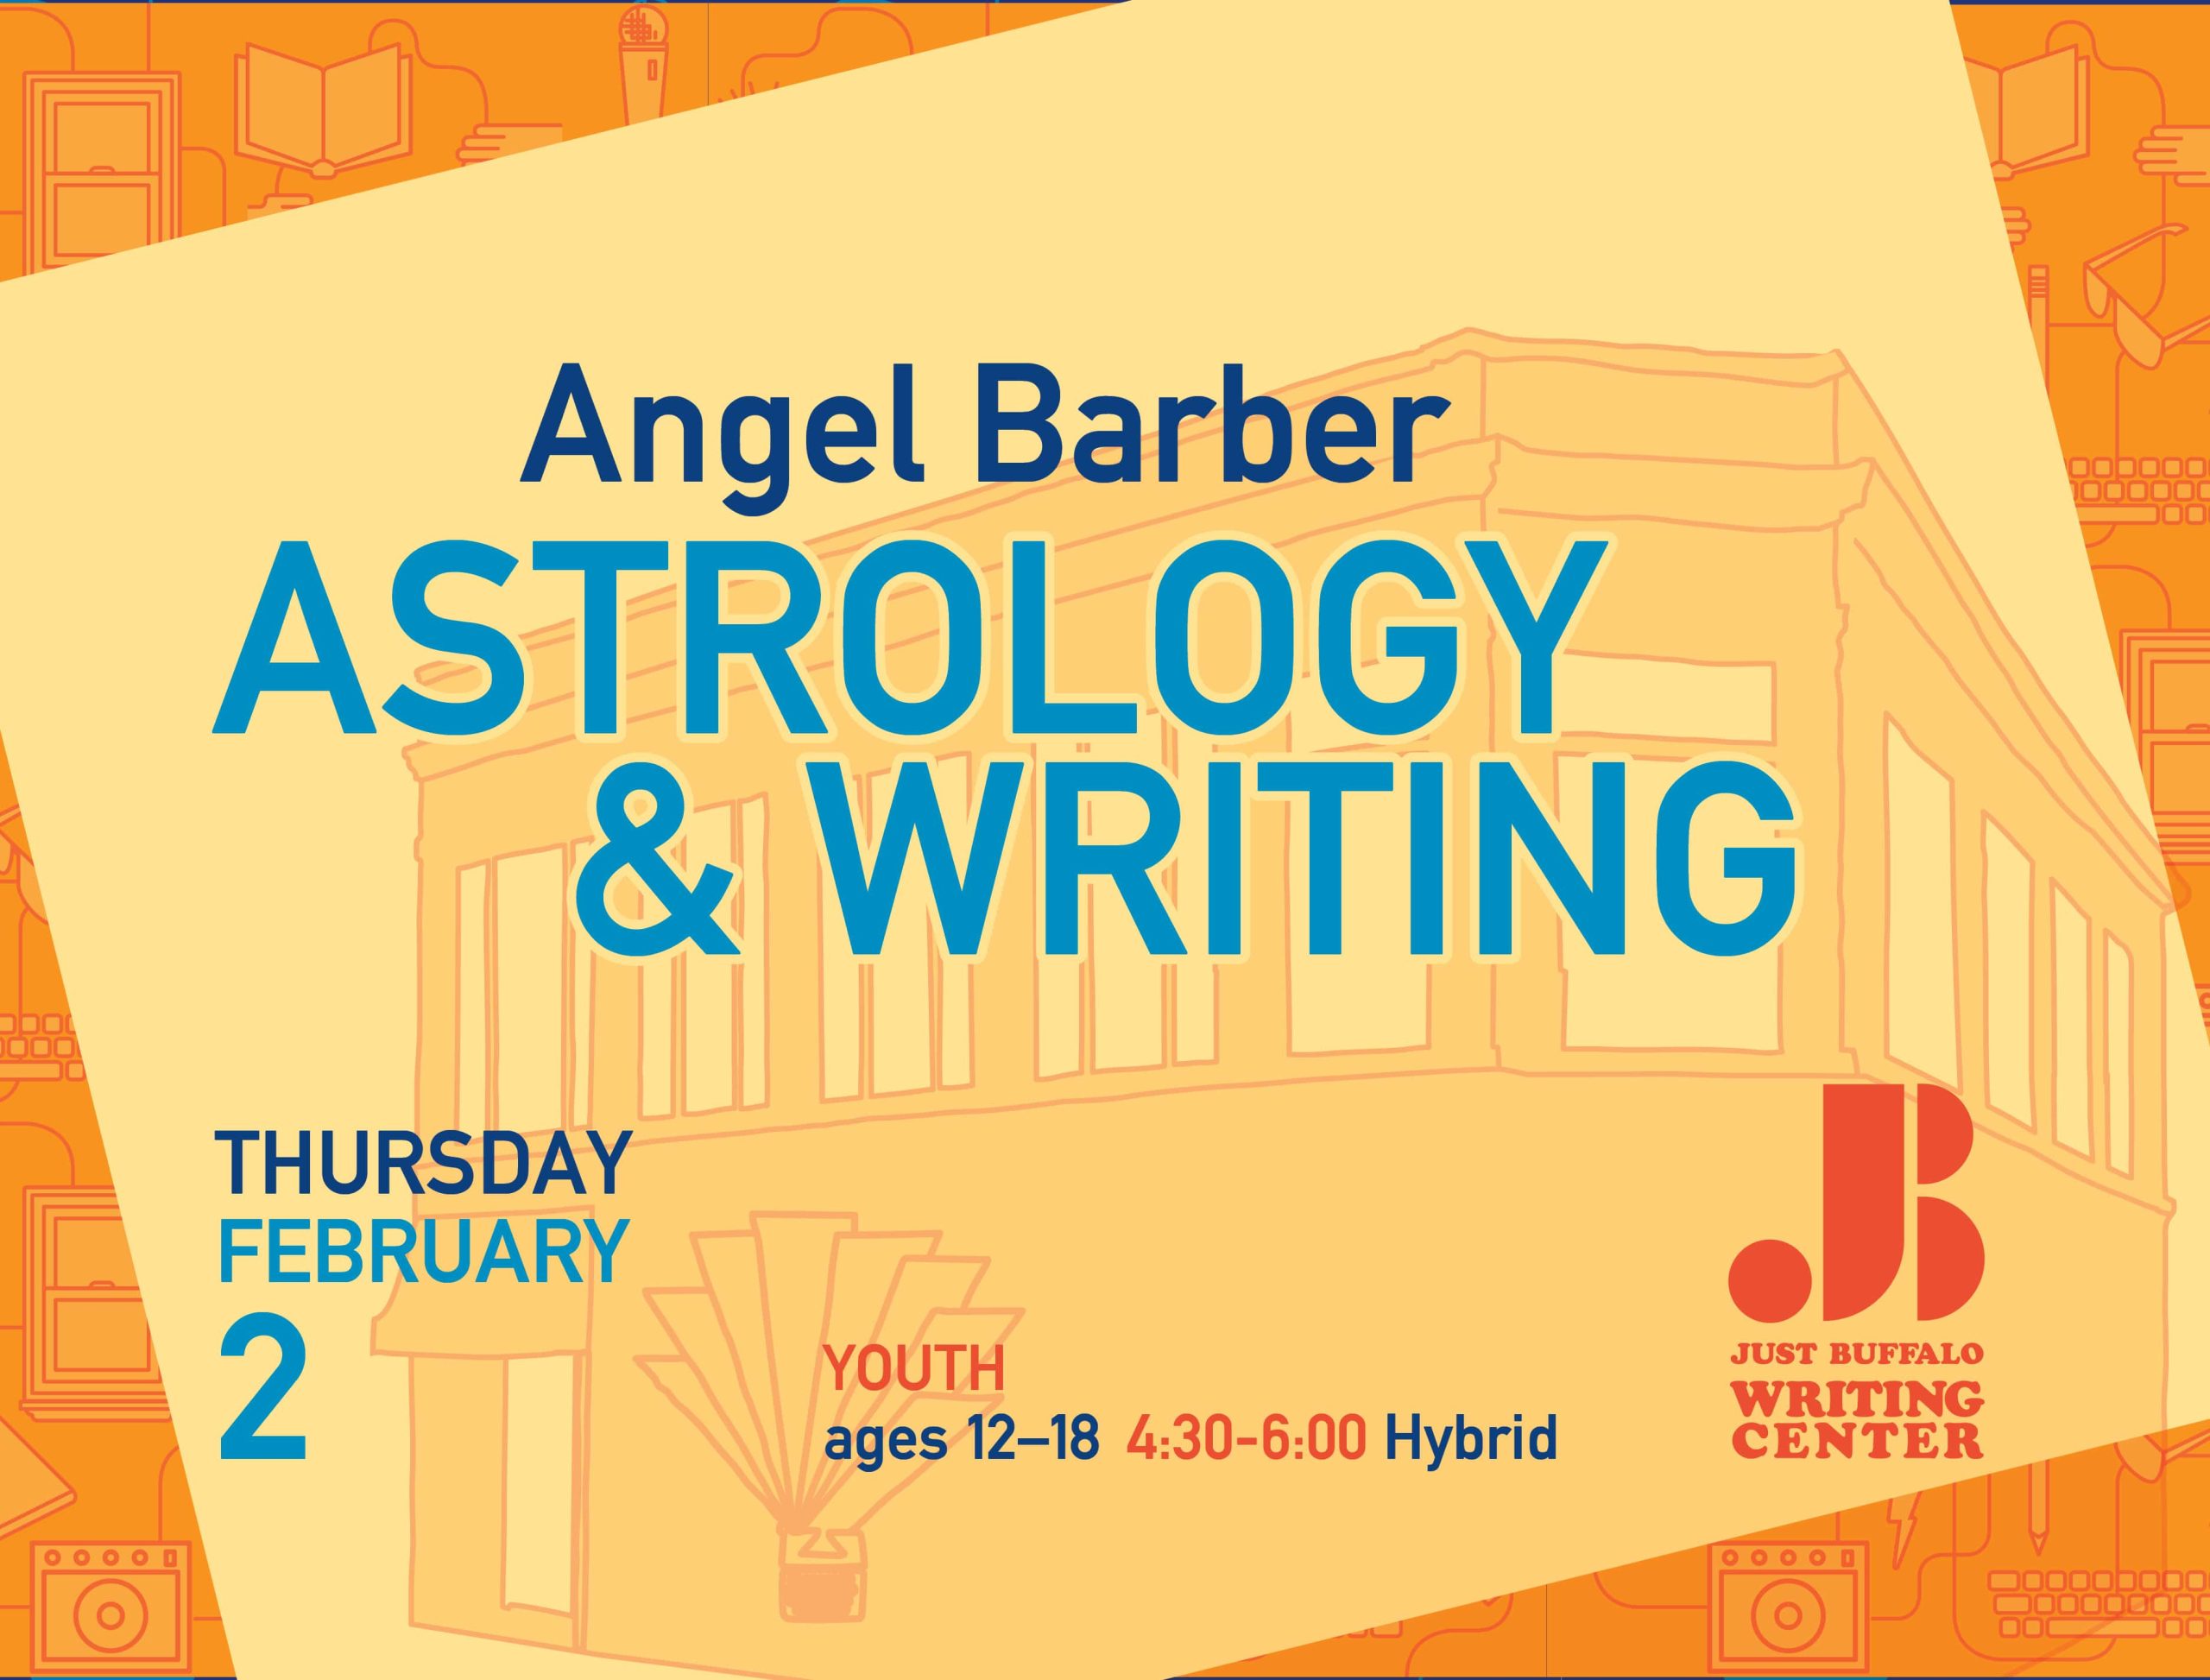 Angel Barber Astrology & Writing at the JBWC